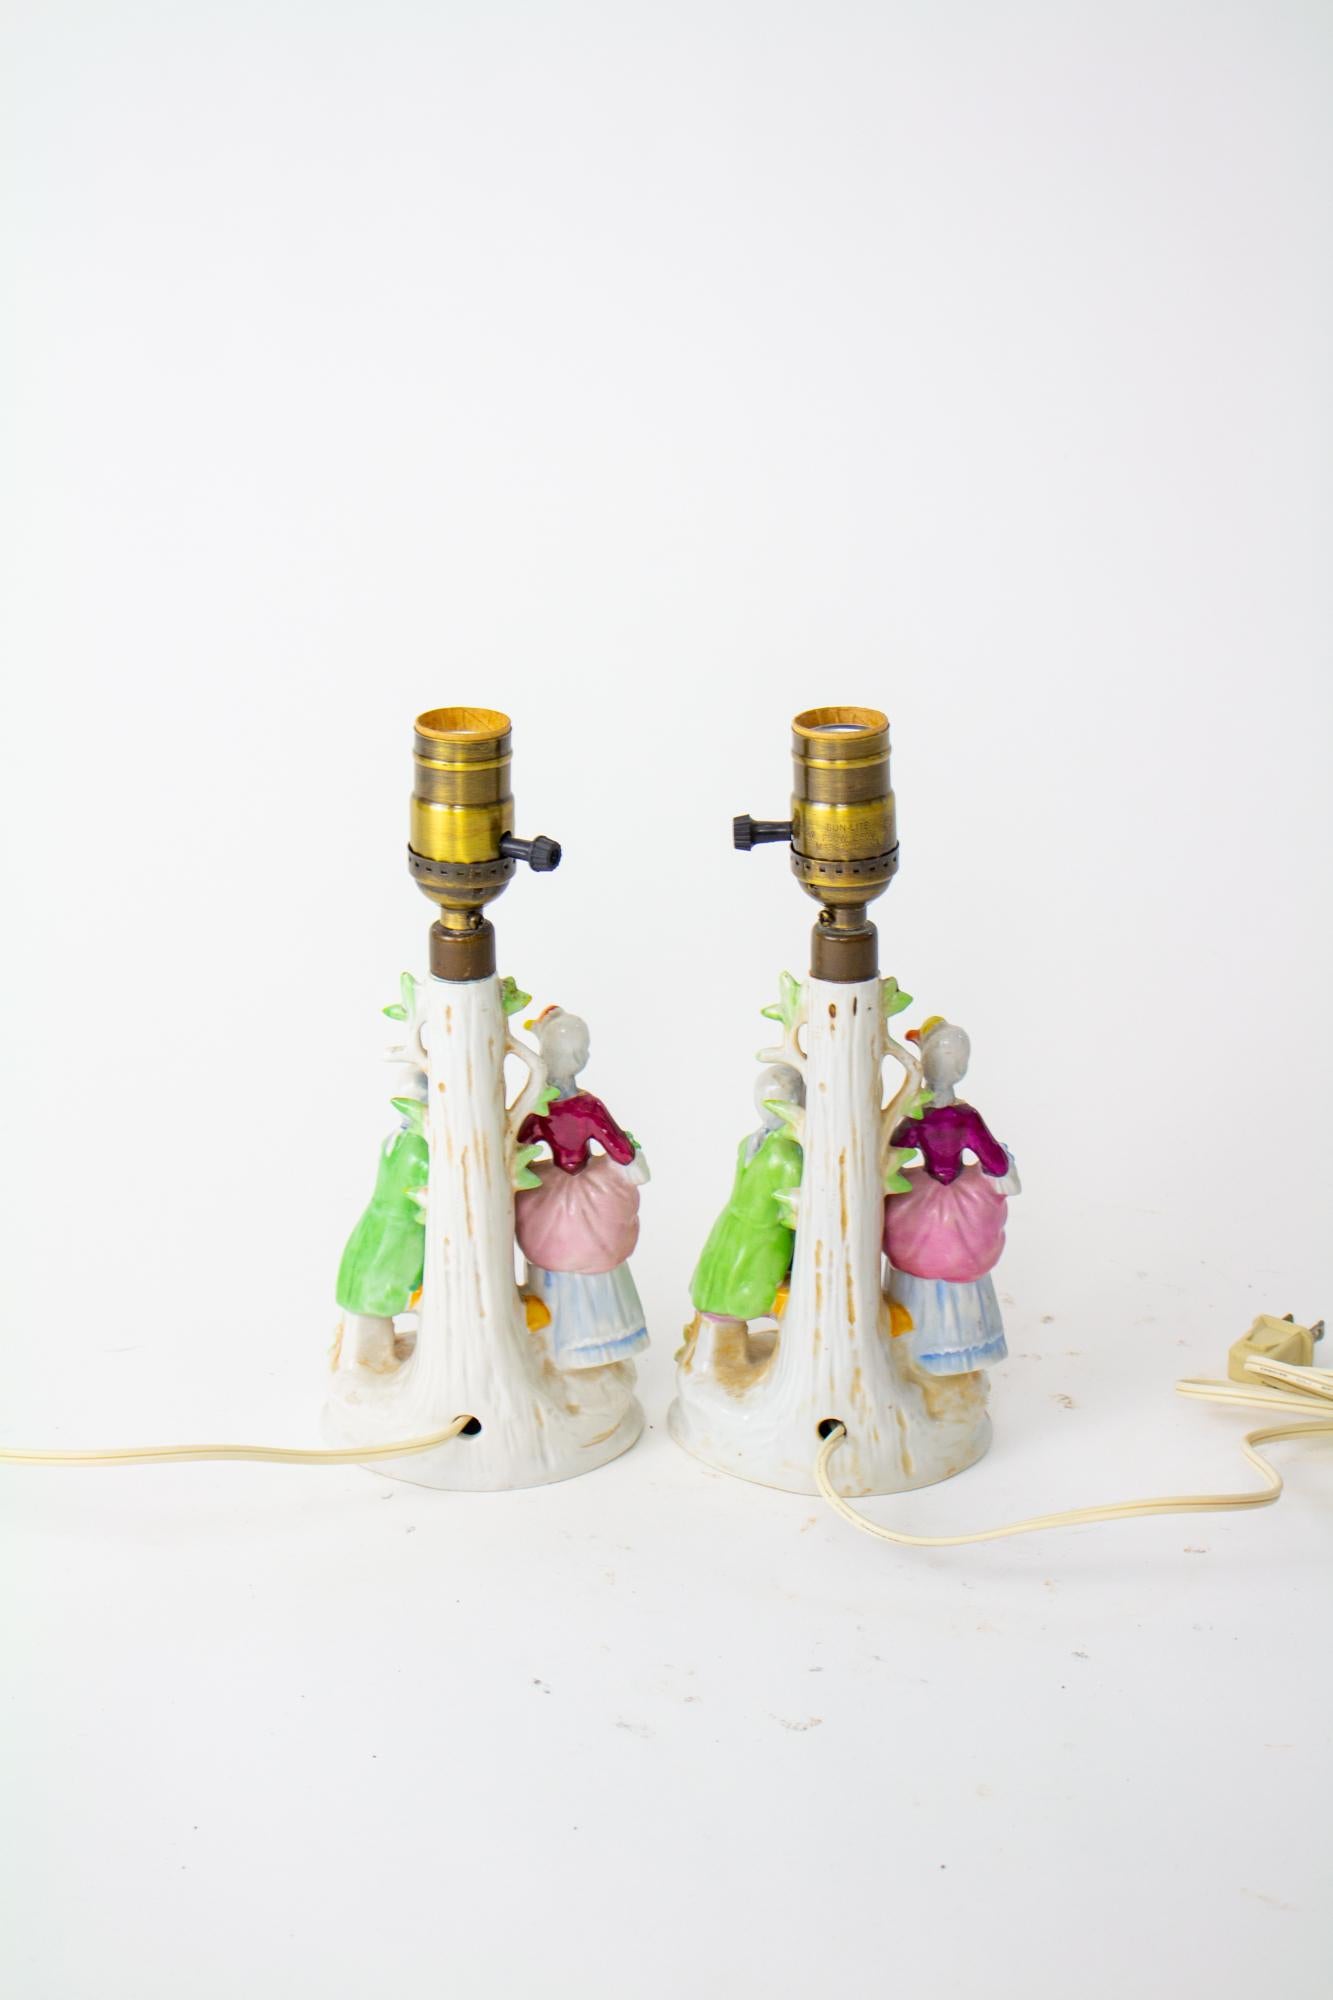 Anglo-Japanese Mid 20th Century Occupied Japan Figural Lamps - a Pair For Sale